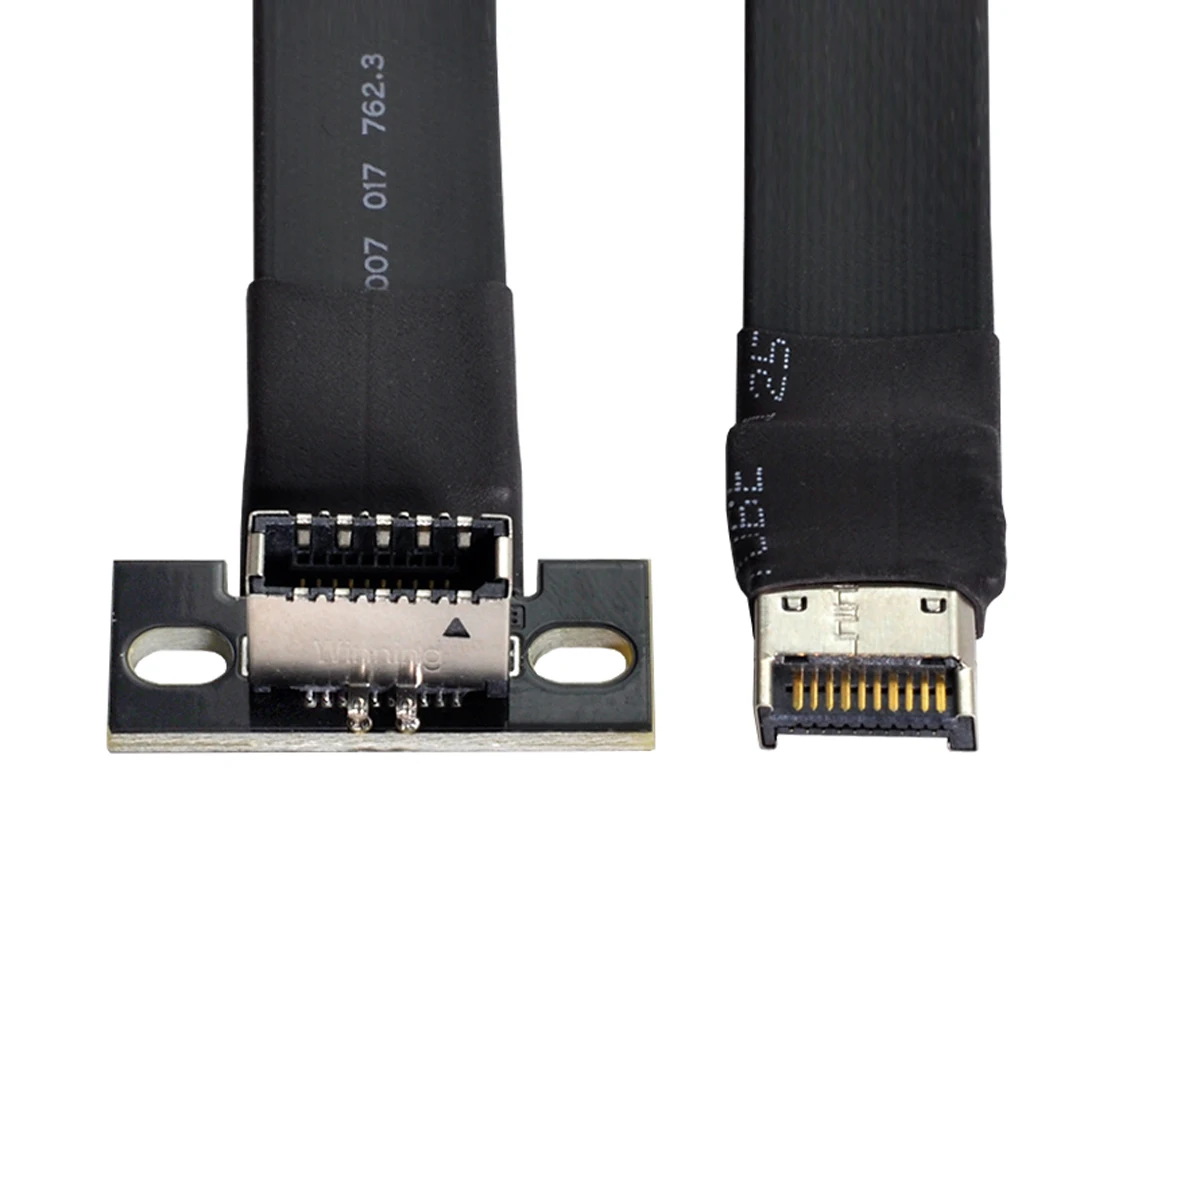 Chenyang 50cm USB 3.1 Front Panel Header Male to Female Type-E Motherboard Extension Data Cable usb 3 1 front panel header type e male to usb c type c female expansion cable 30cm computer motherboard connector wire cord line